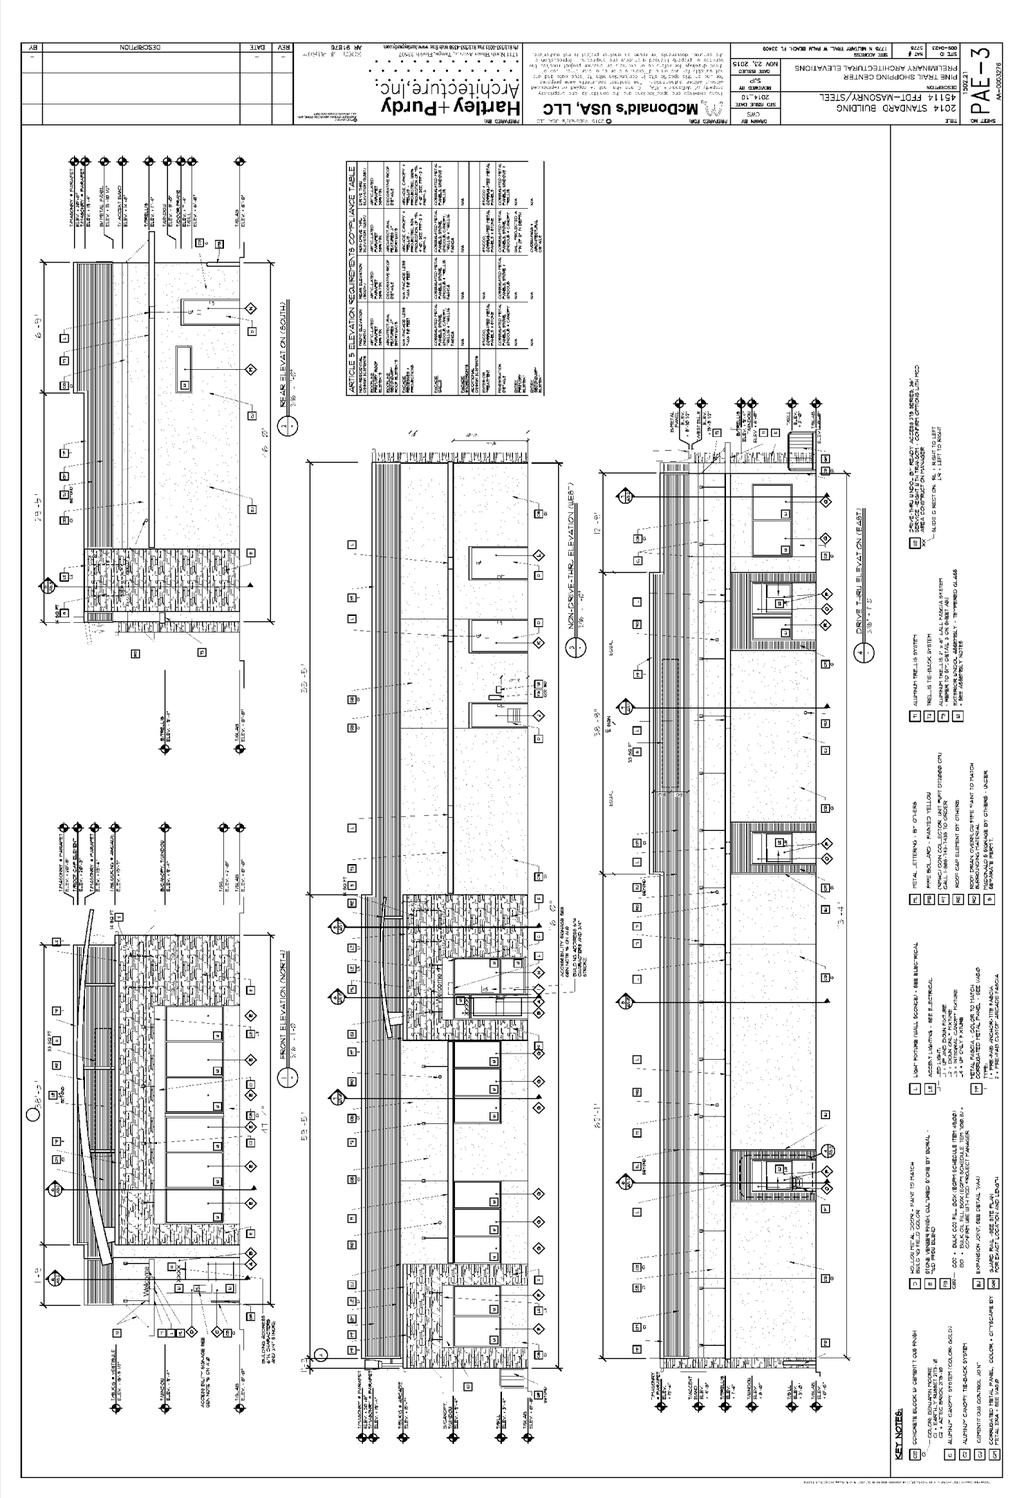 Figure 11 - Preliminary Architectural Elevations Building 8